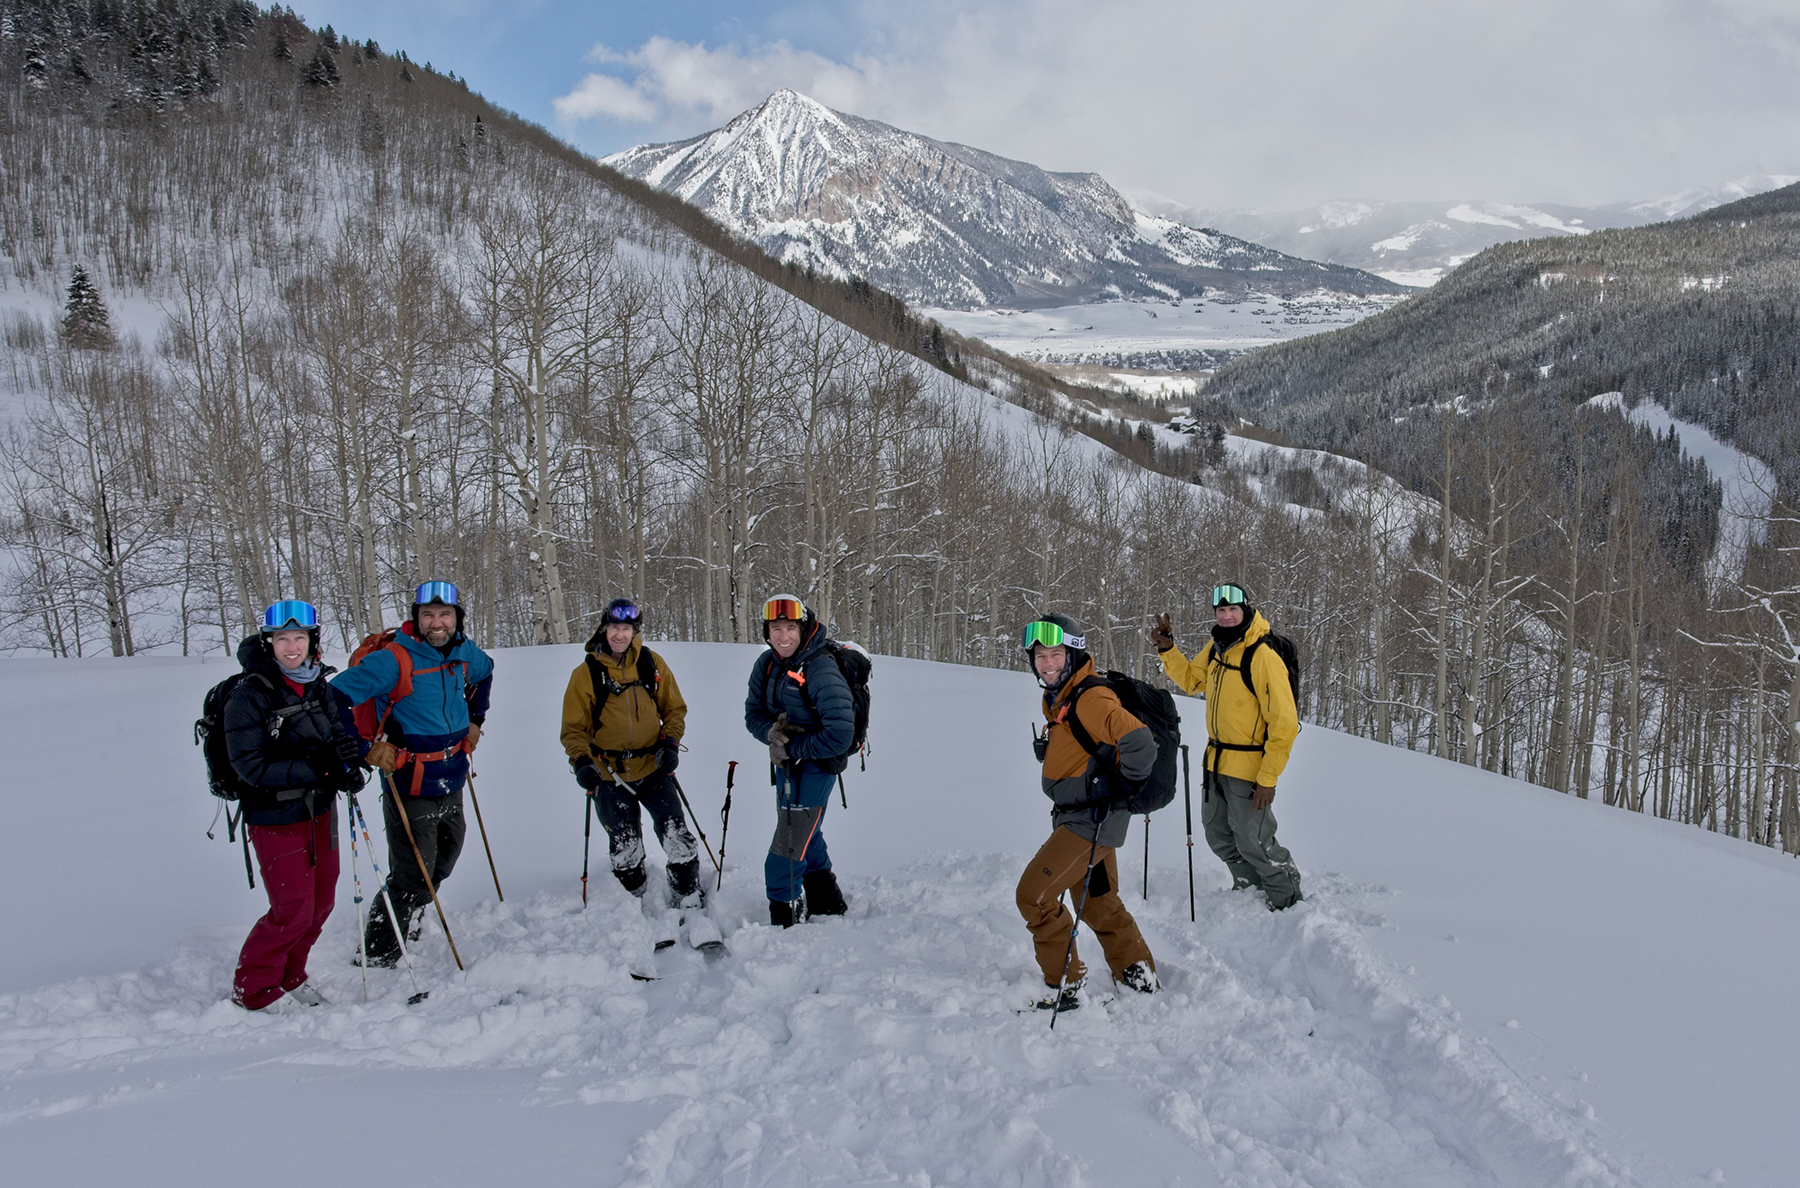 One of many guided group tours in the Crested Butte backcountry